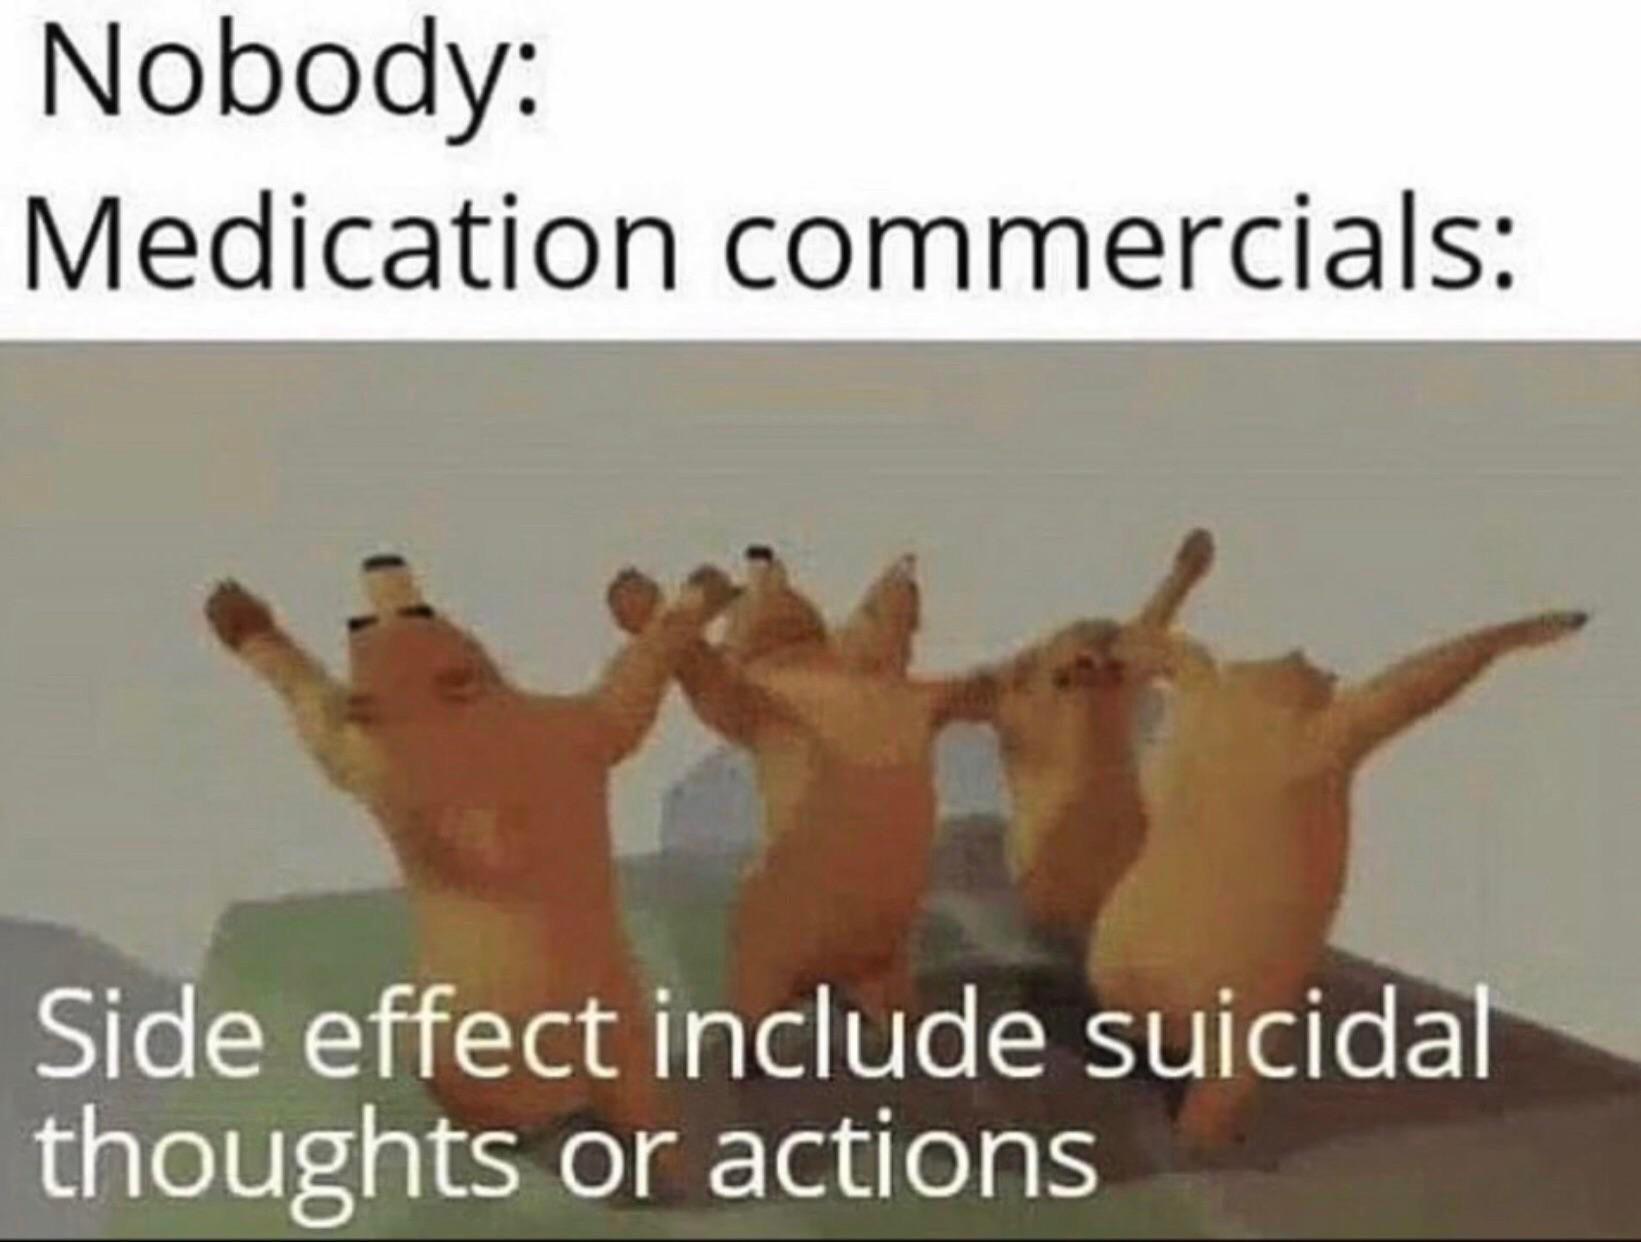 suicidal thoughts memes - Nobody Medication commercials Side effect include suicidal thoughts or actions